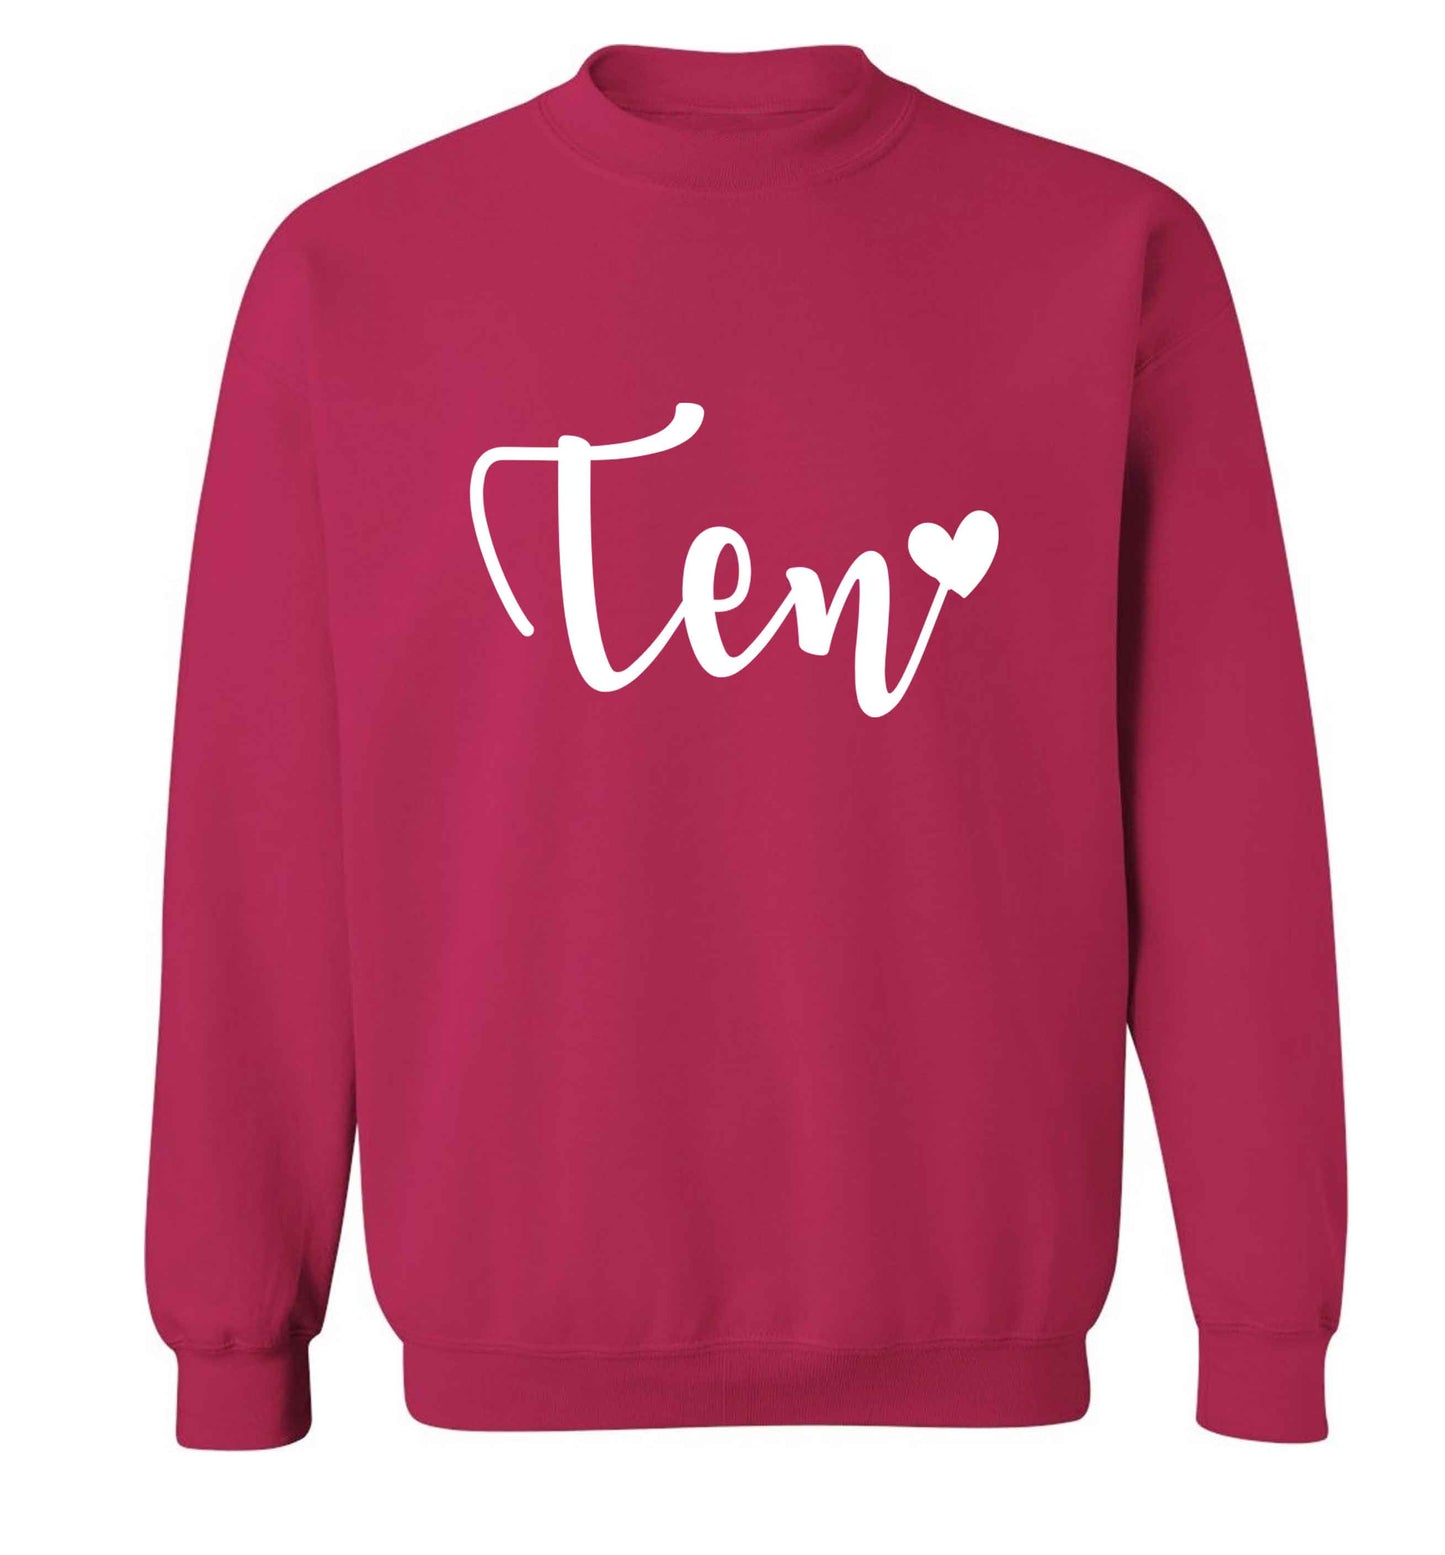 Rose gold eleven adult's unisex pink sweater 2XL